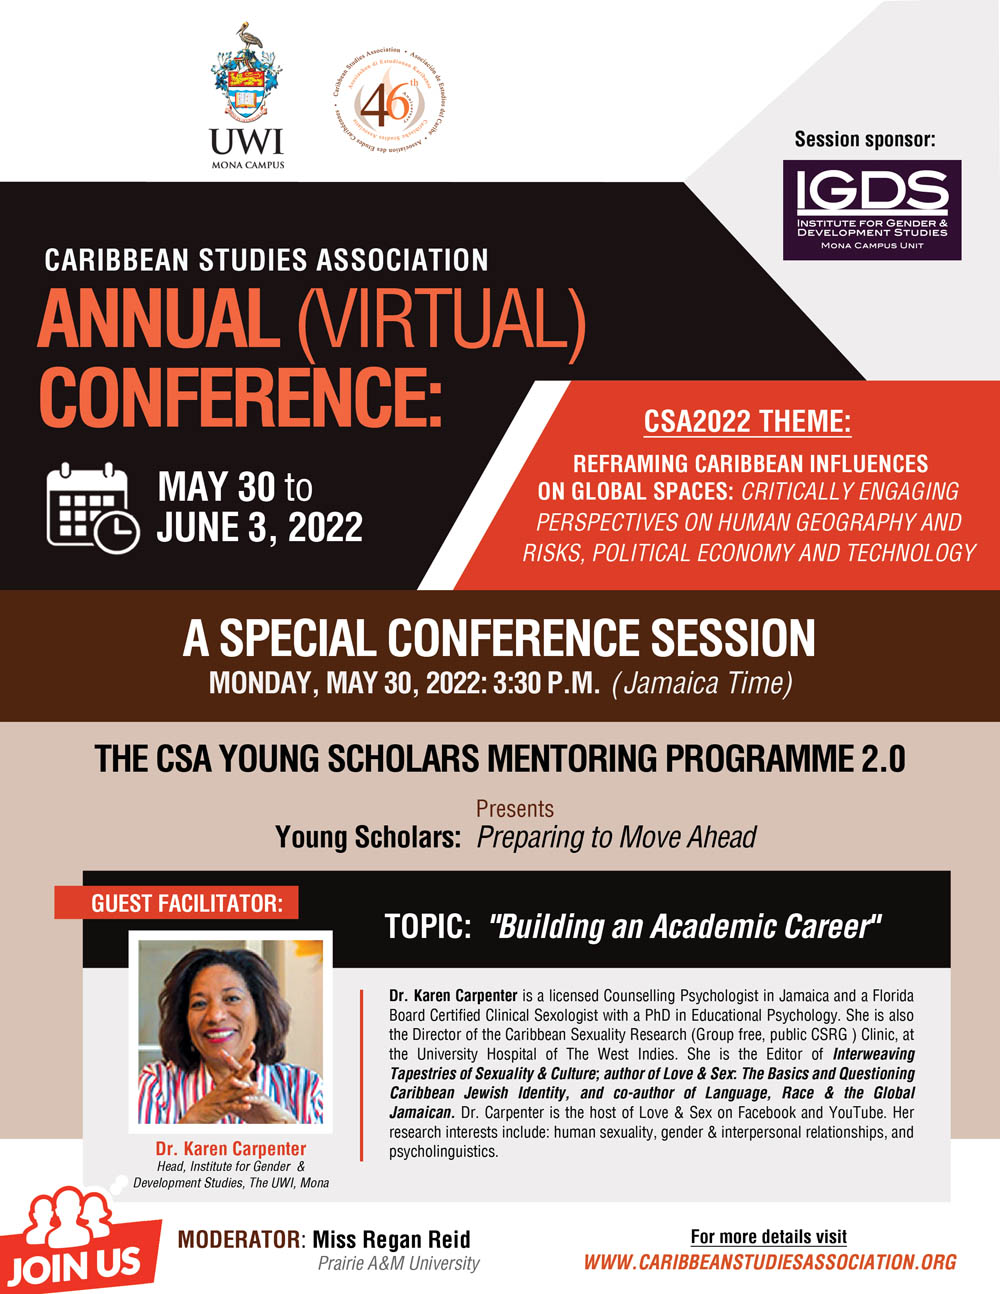 CSA Young Scholars Mentoring Programme 2.0 - Special Conference Session